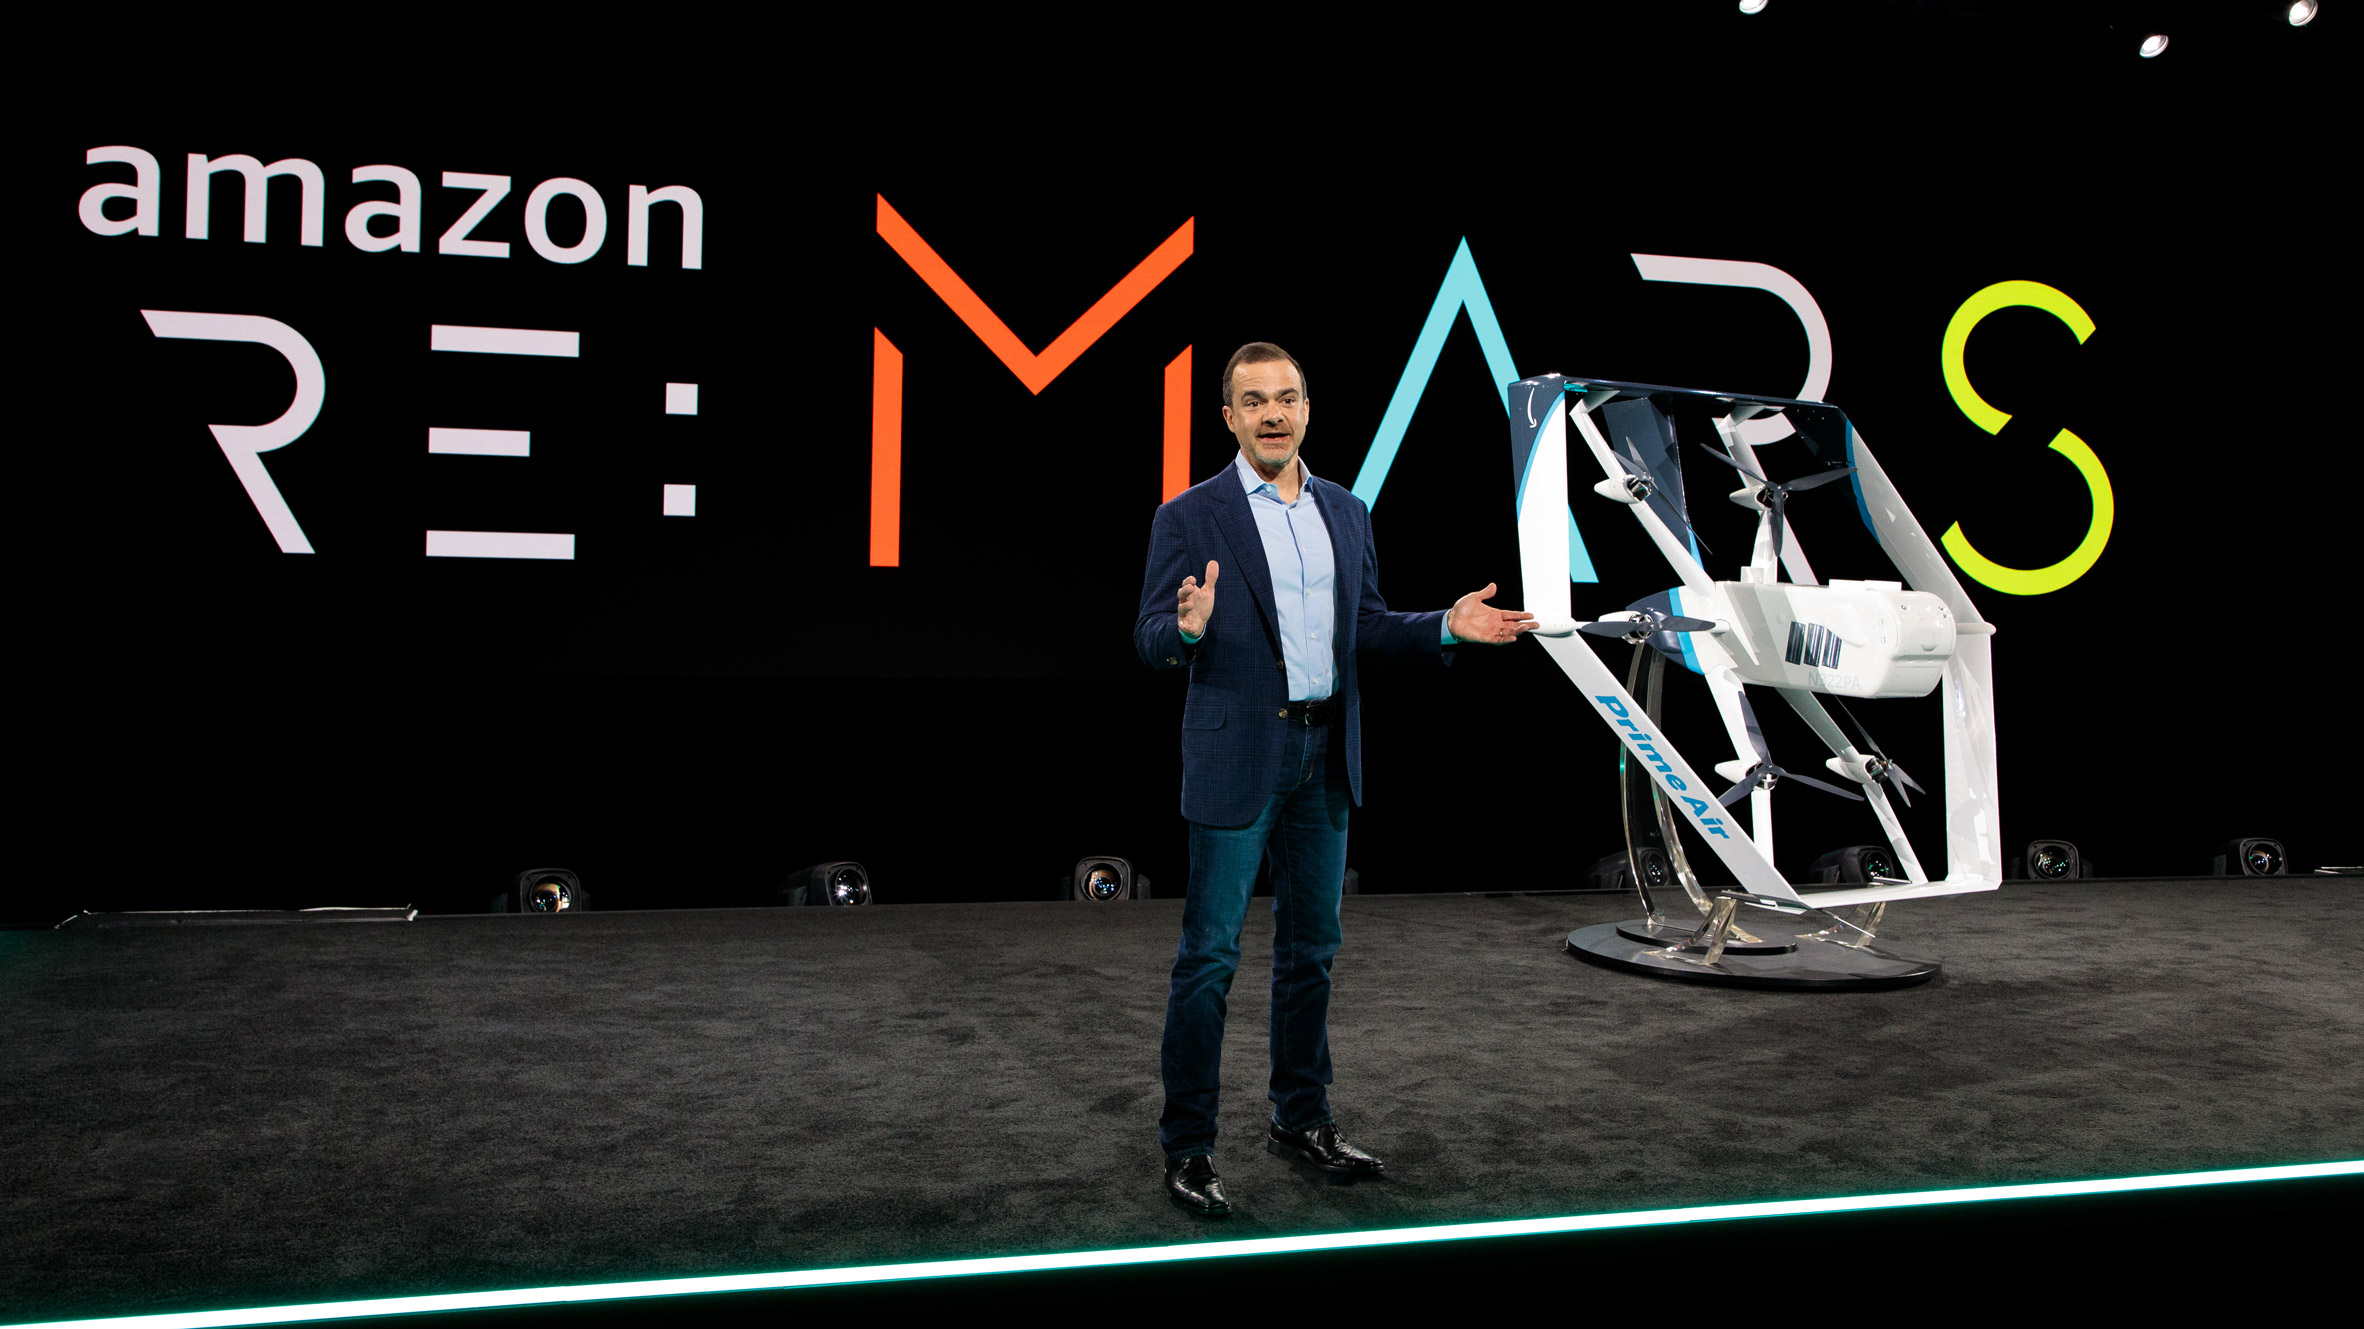 Ja apt snack Amazon Prime Air drone to deliver purchases by drone "within months"